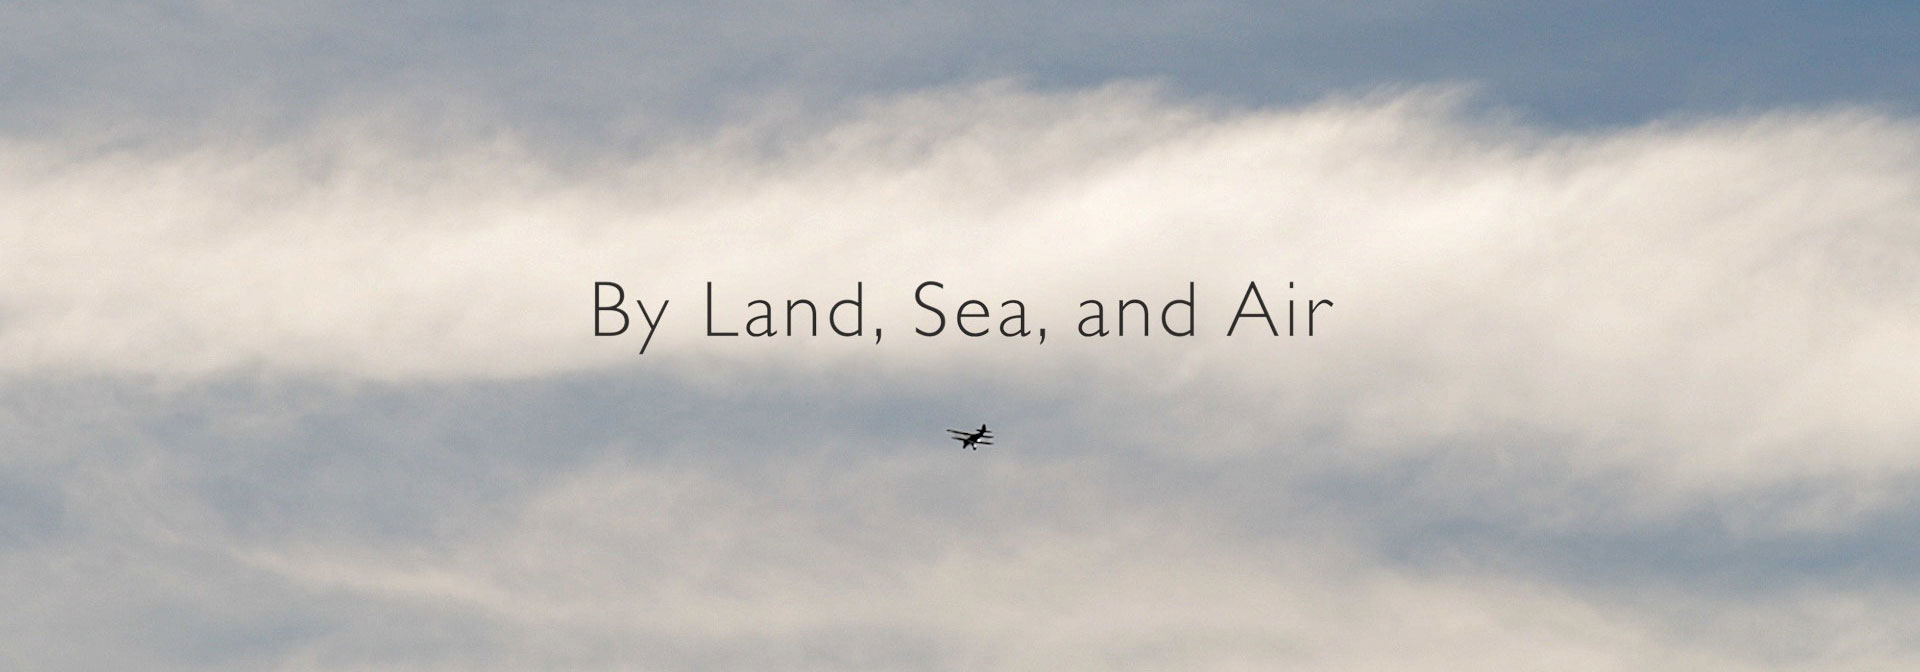 By Land, Sea, and Air